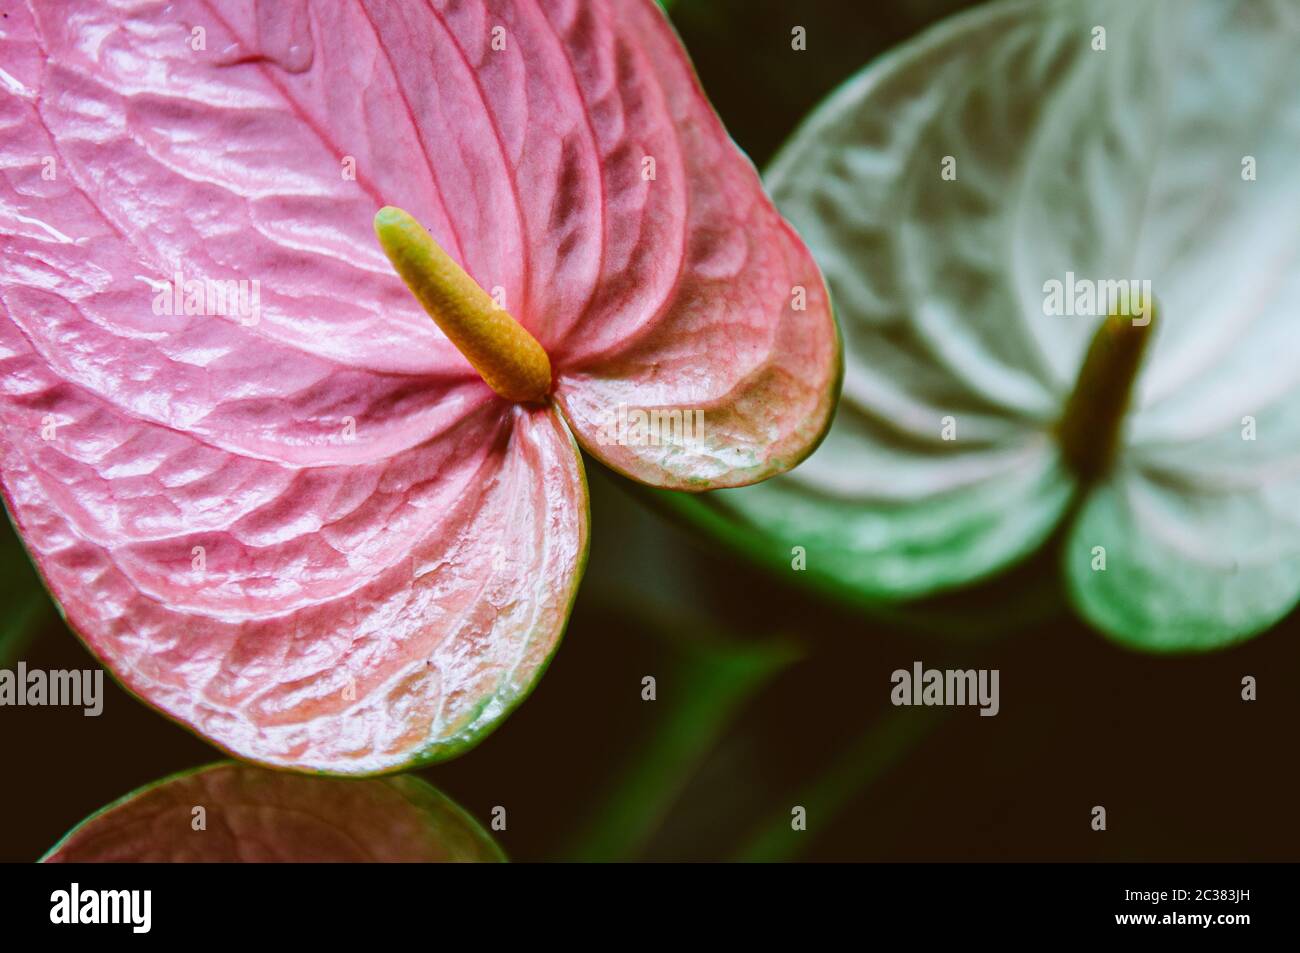 Pink Anthurium flower or Flamingo Flower with lush dark green leaves background. close up detail Stock Photo